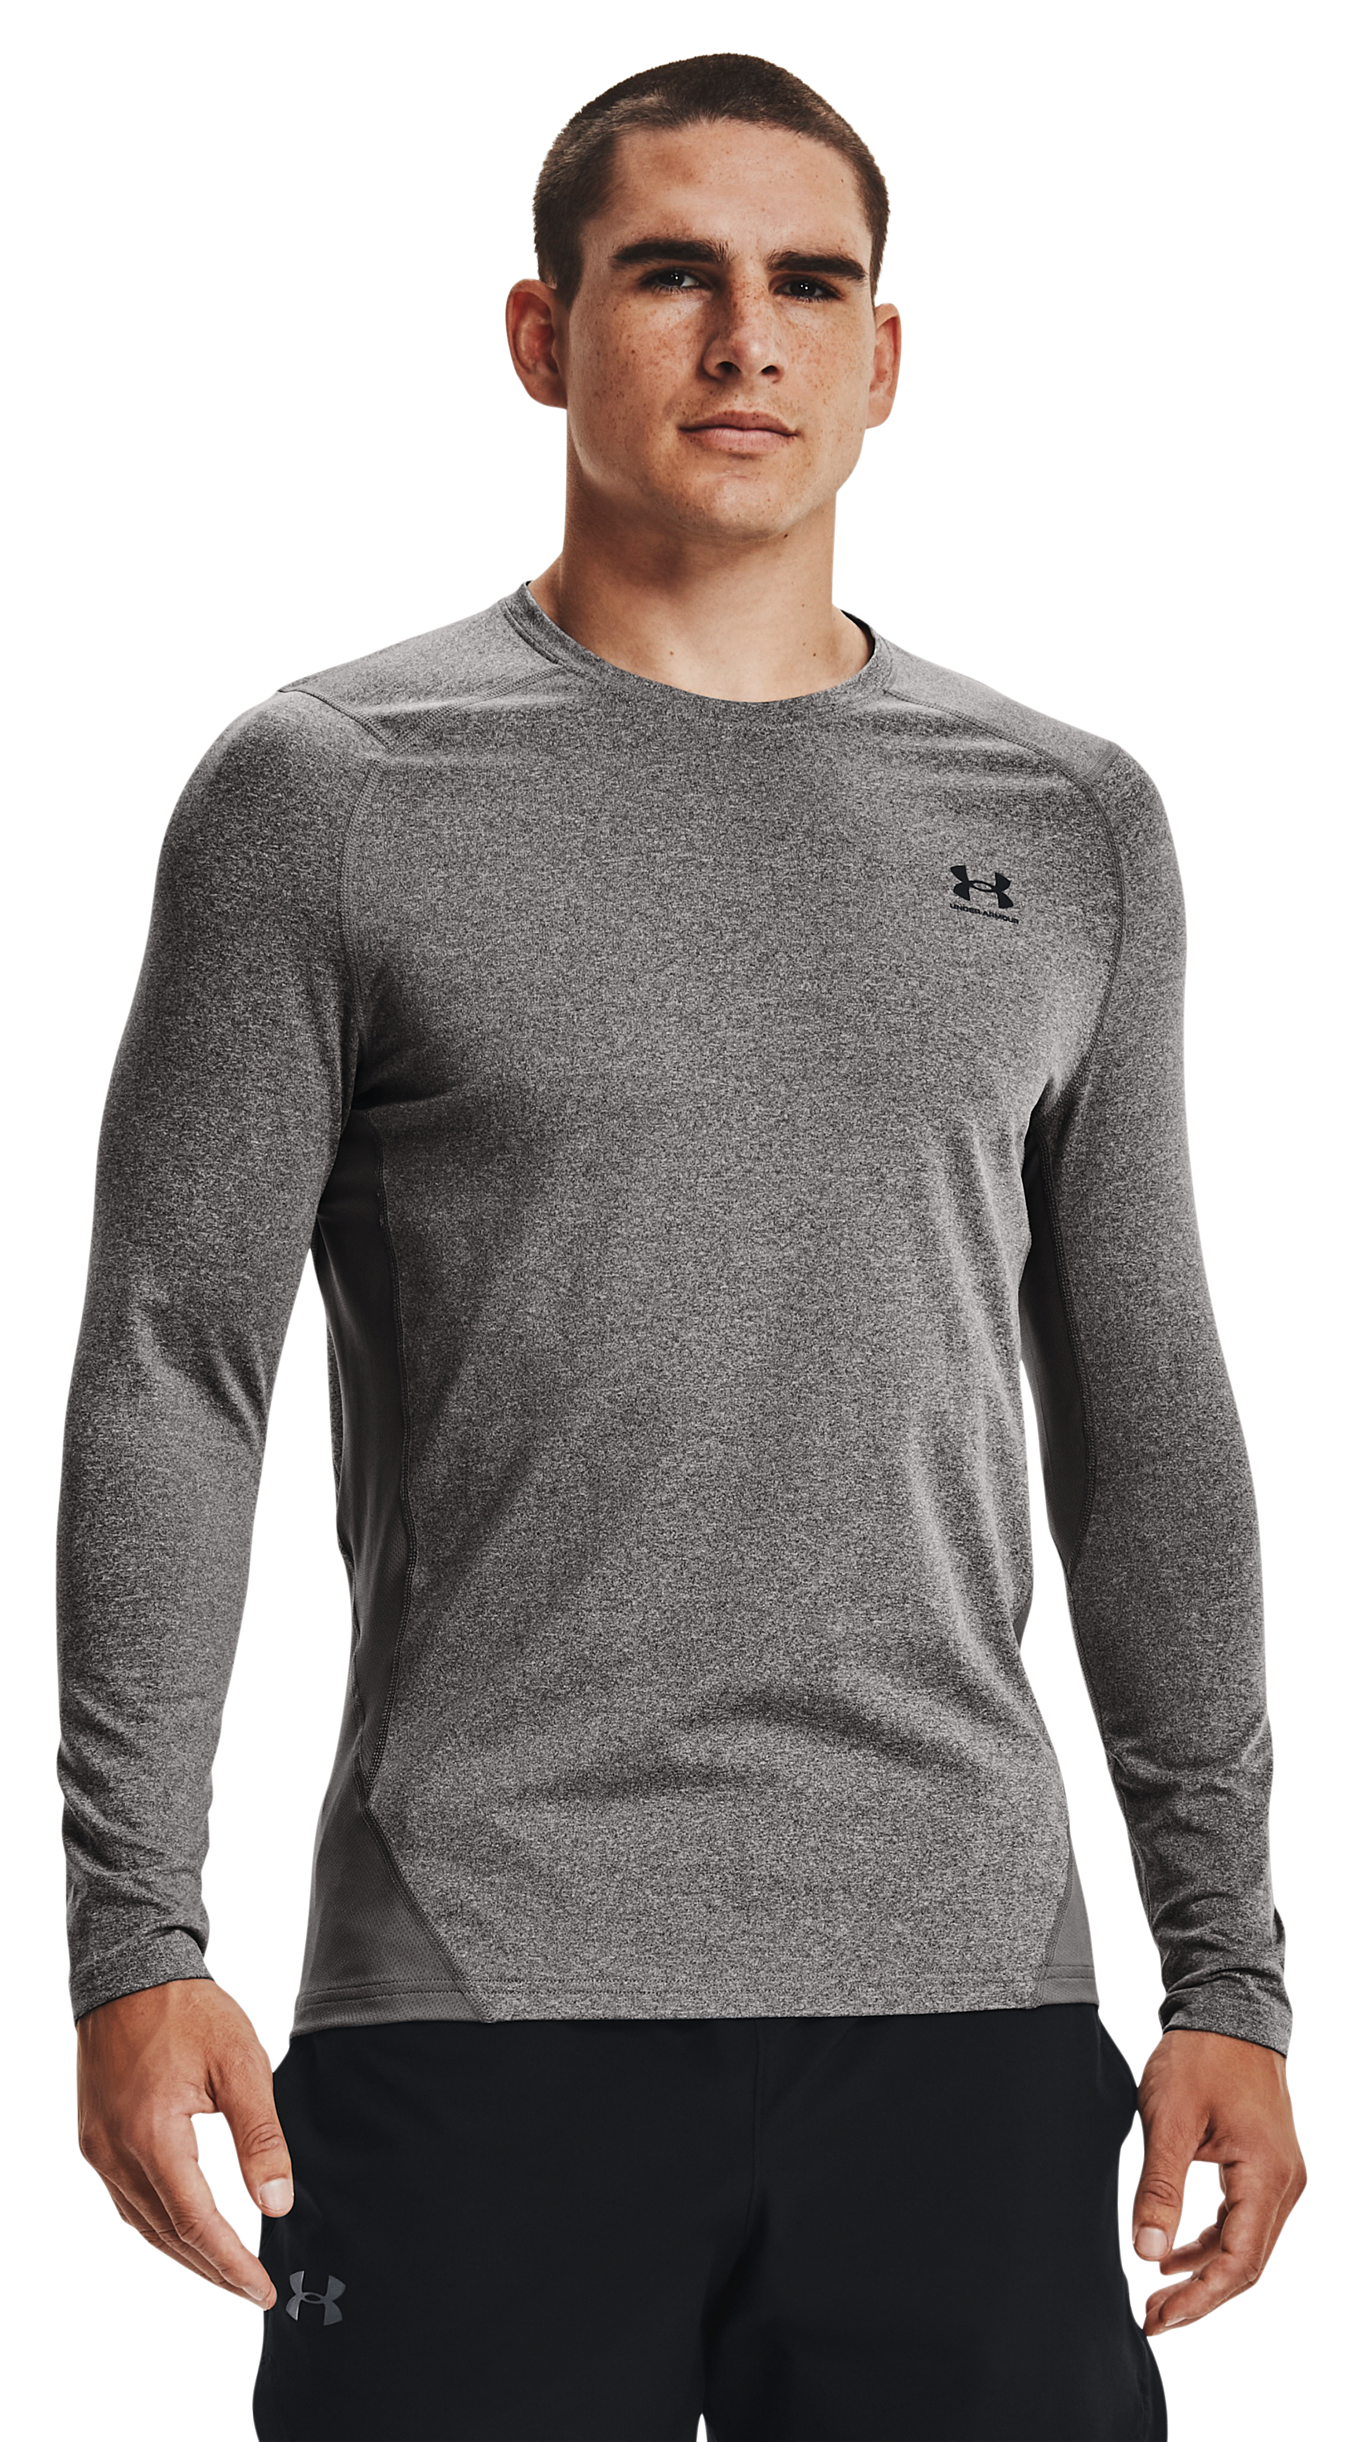 Under Armour ColdGear Fitted Long-Sleeve Crew for Men - Charcoal Light Heather/Black - 2XLT